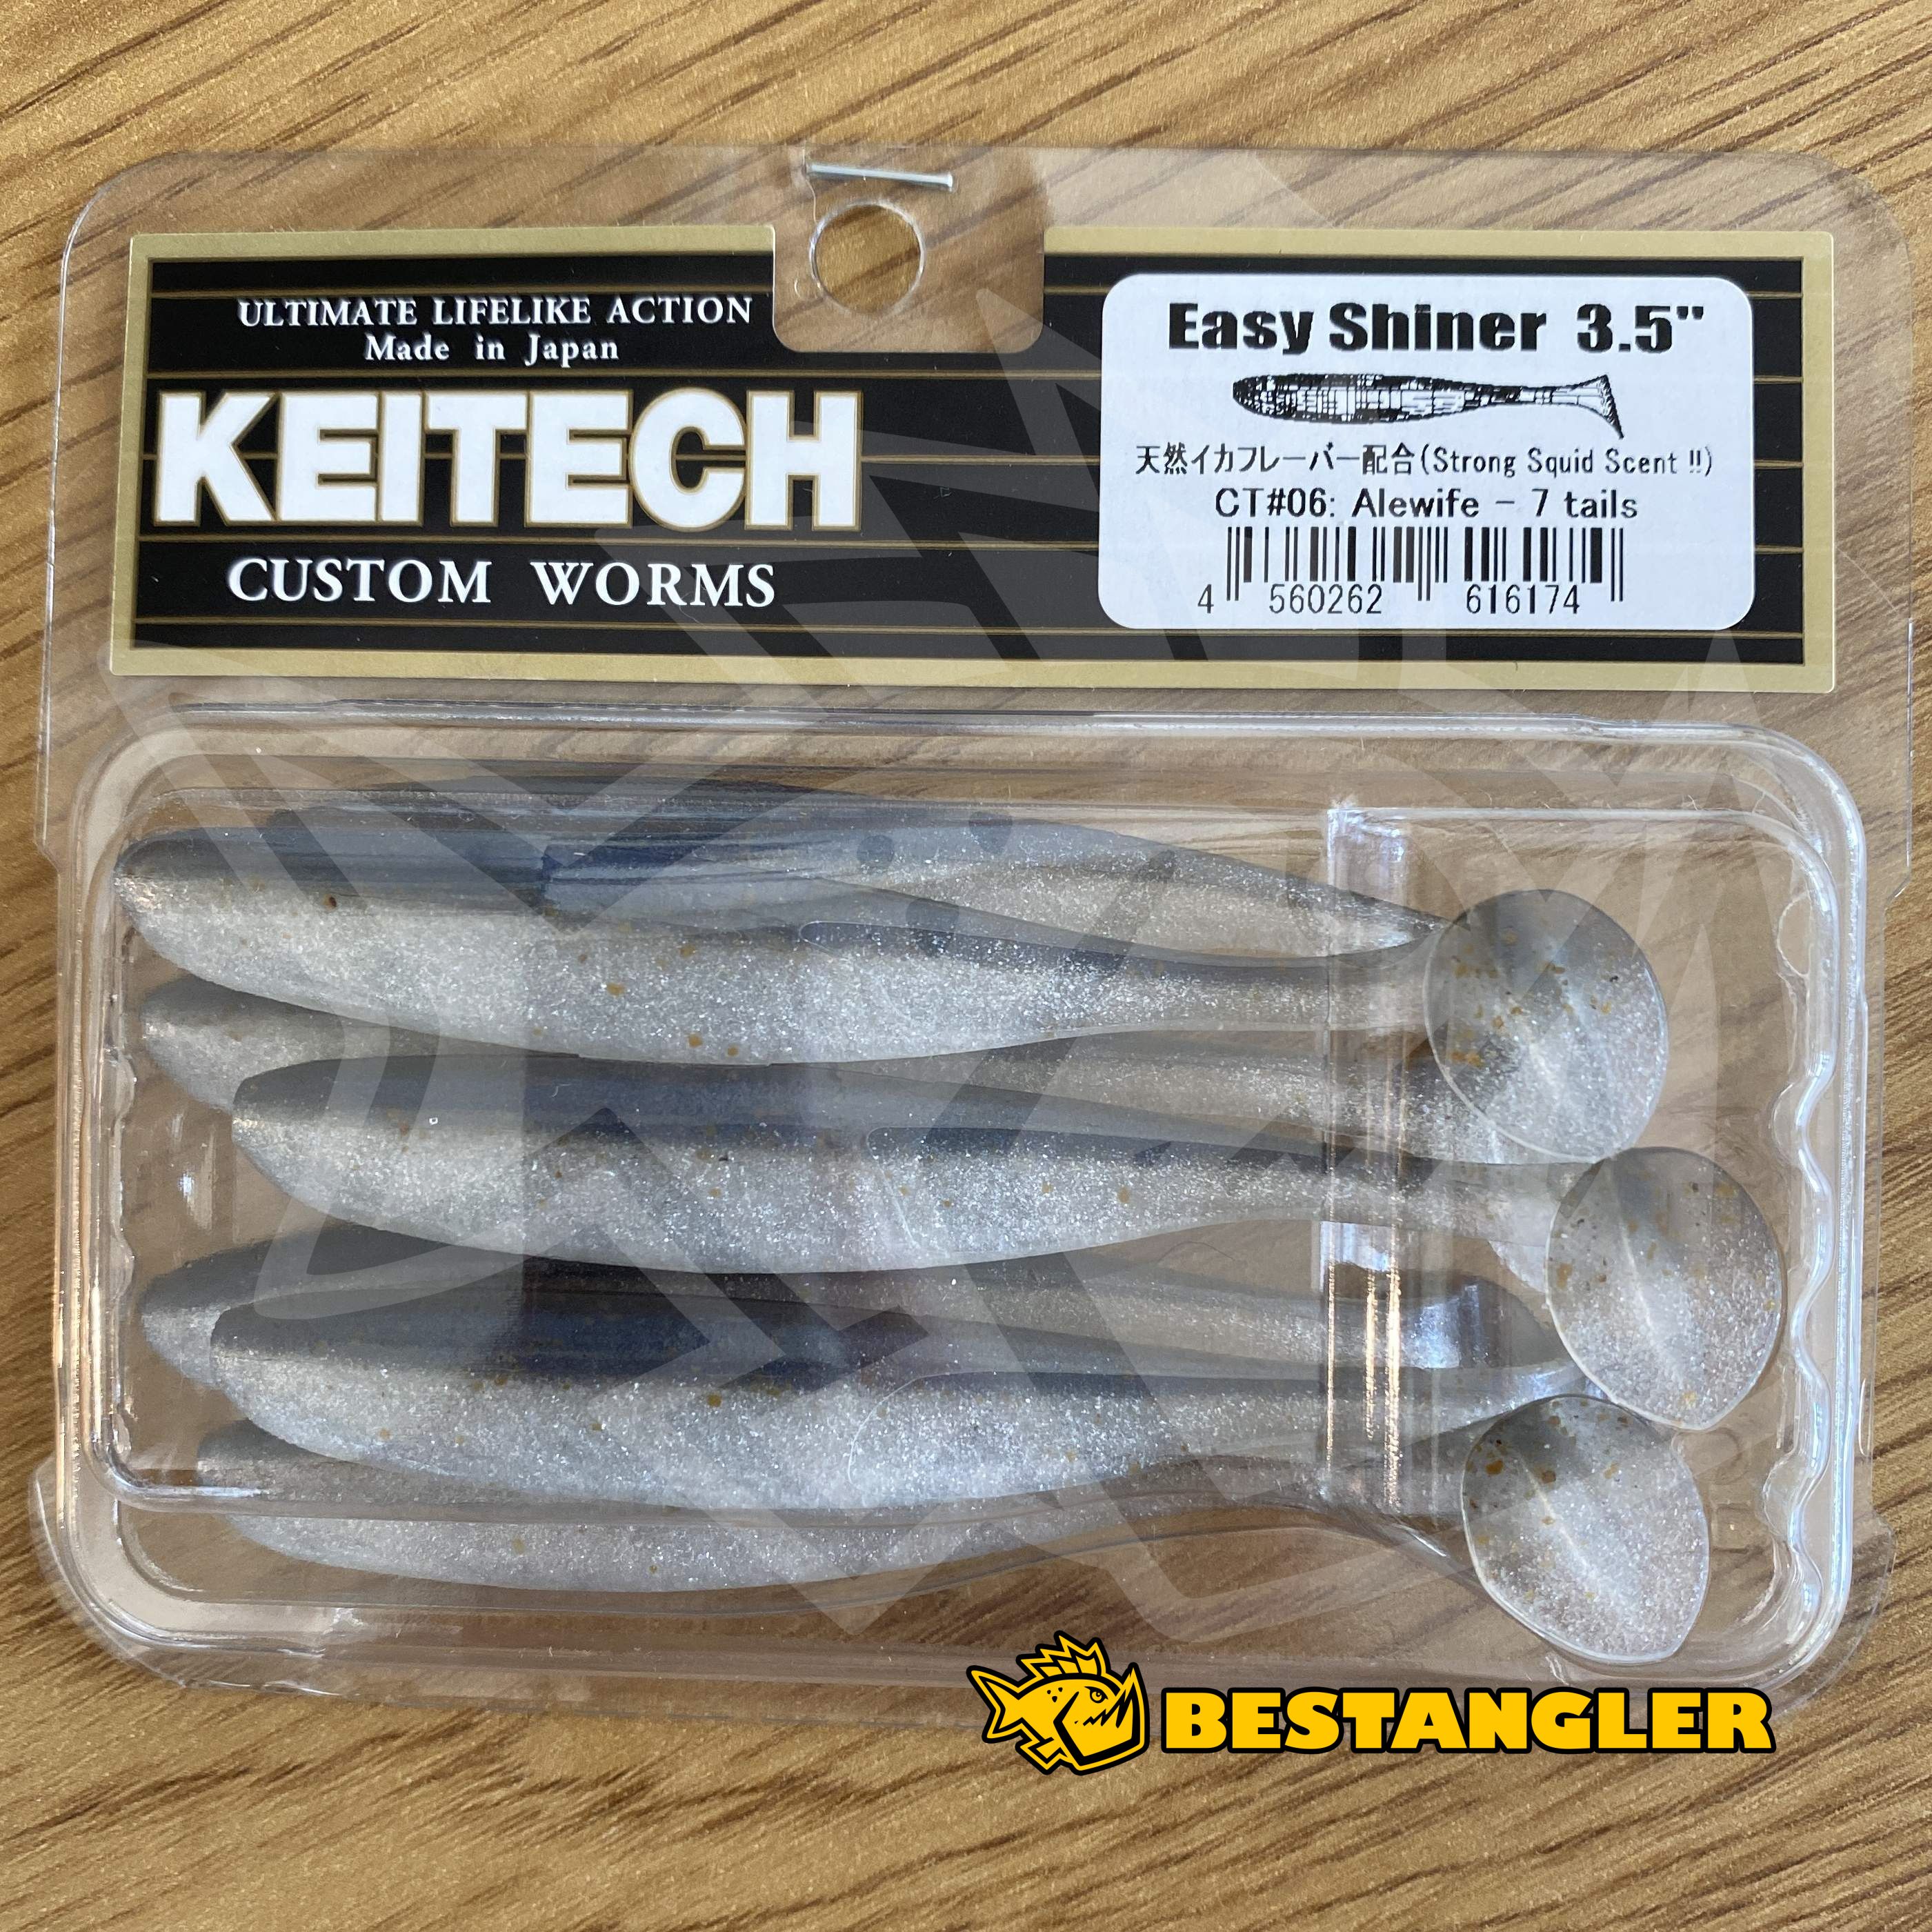 Keitech Easy Shiner 3.5 Alewife